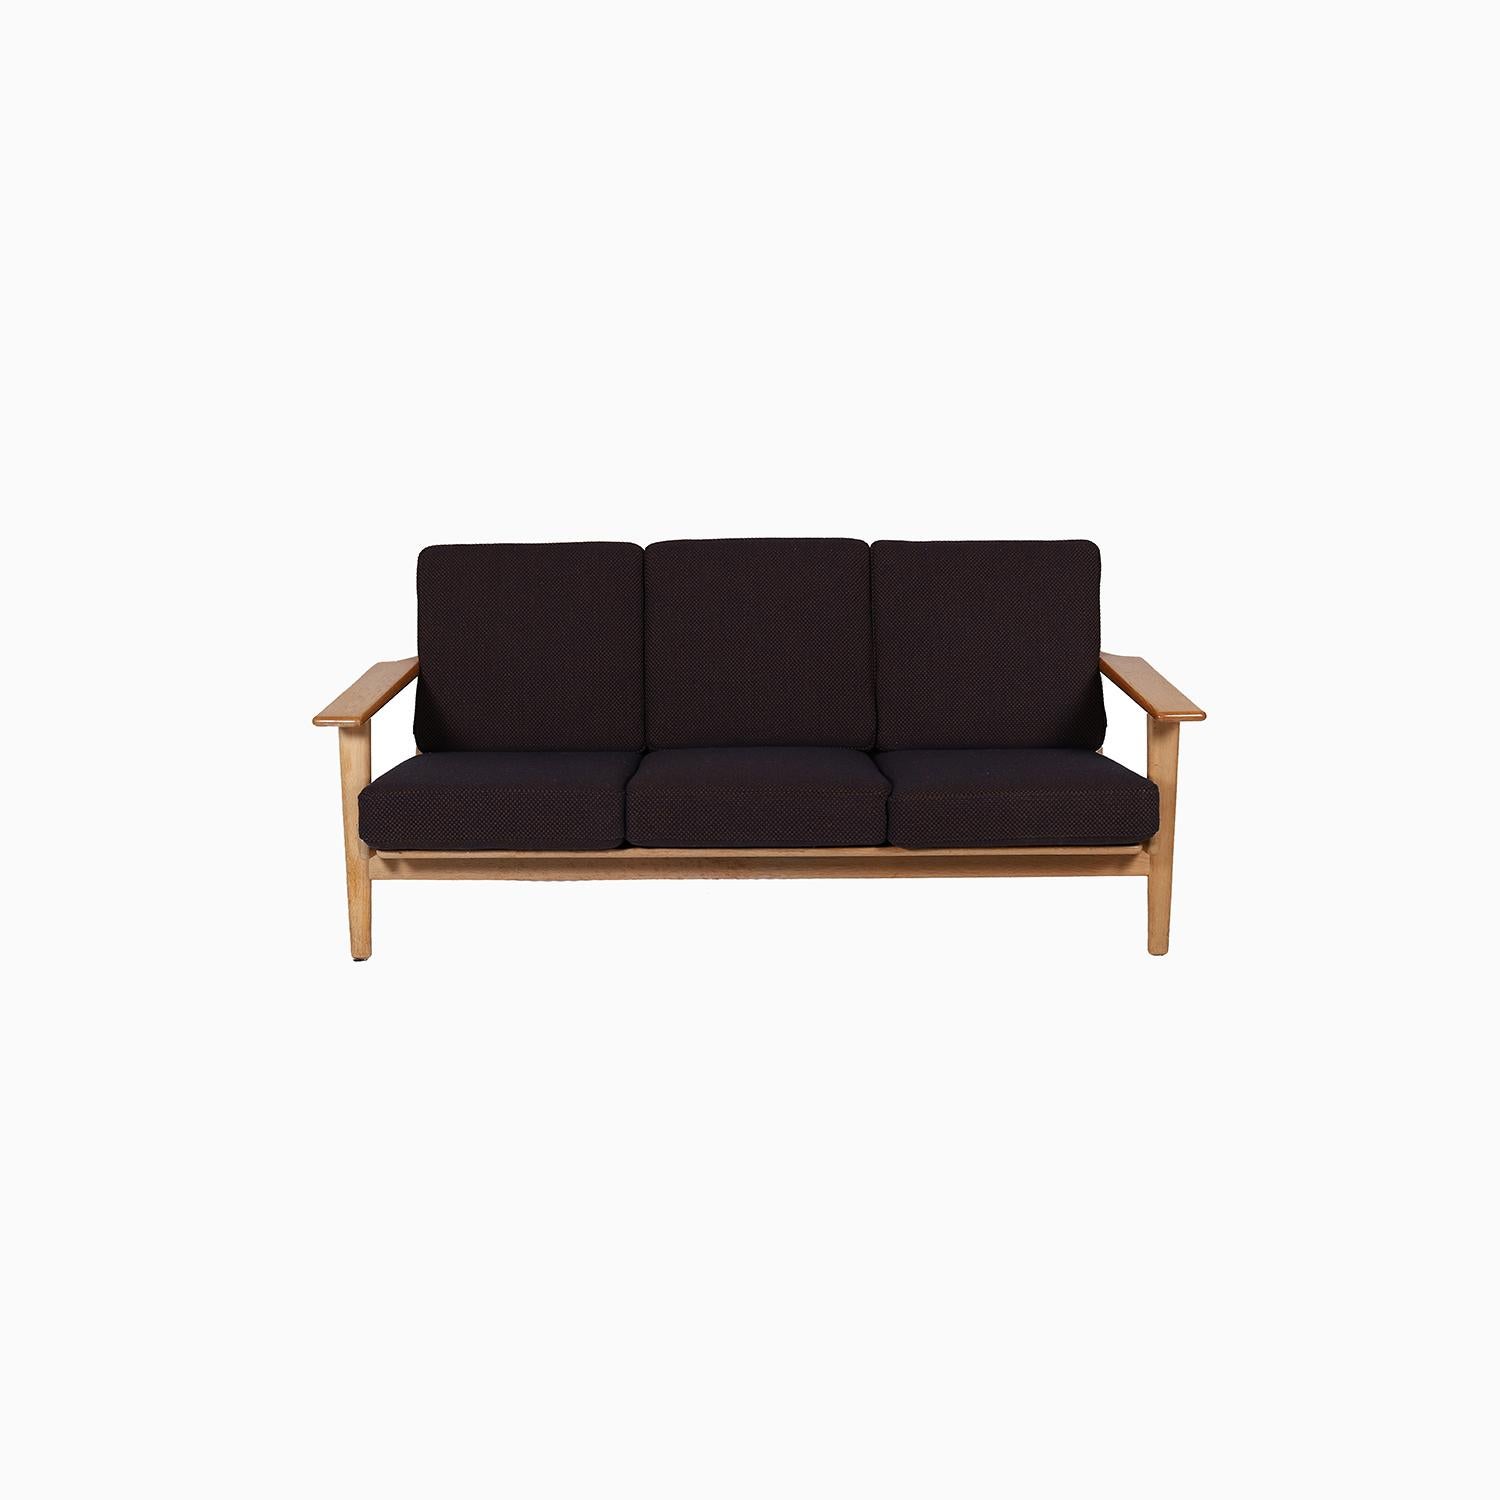 Three seat sofa designed by Hans Wegner for Getama, model 290 in oak. Newly upholstered in Kvadrat textiles Sisu. Cleanup of the frame will be completed upon purchase.


Professional, skilled furniture restoration is an integral part of what we